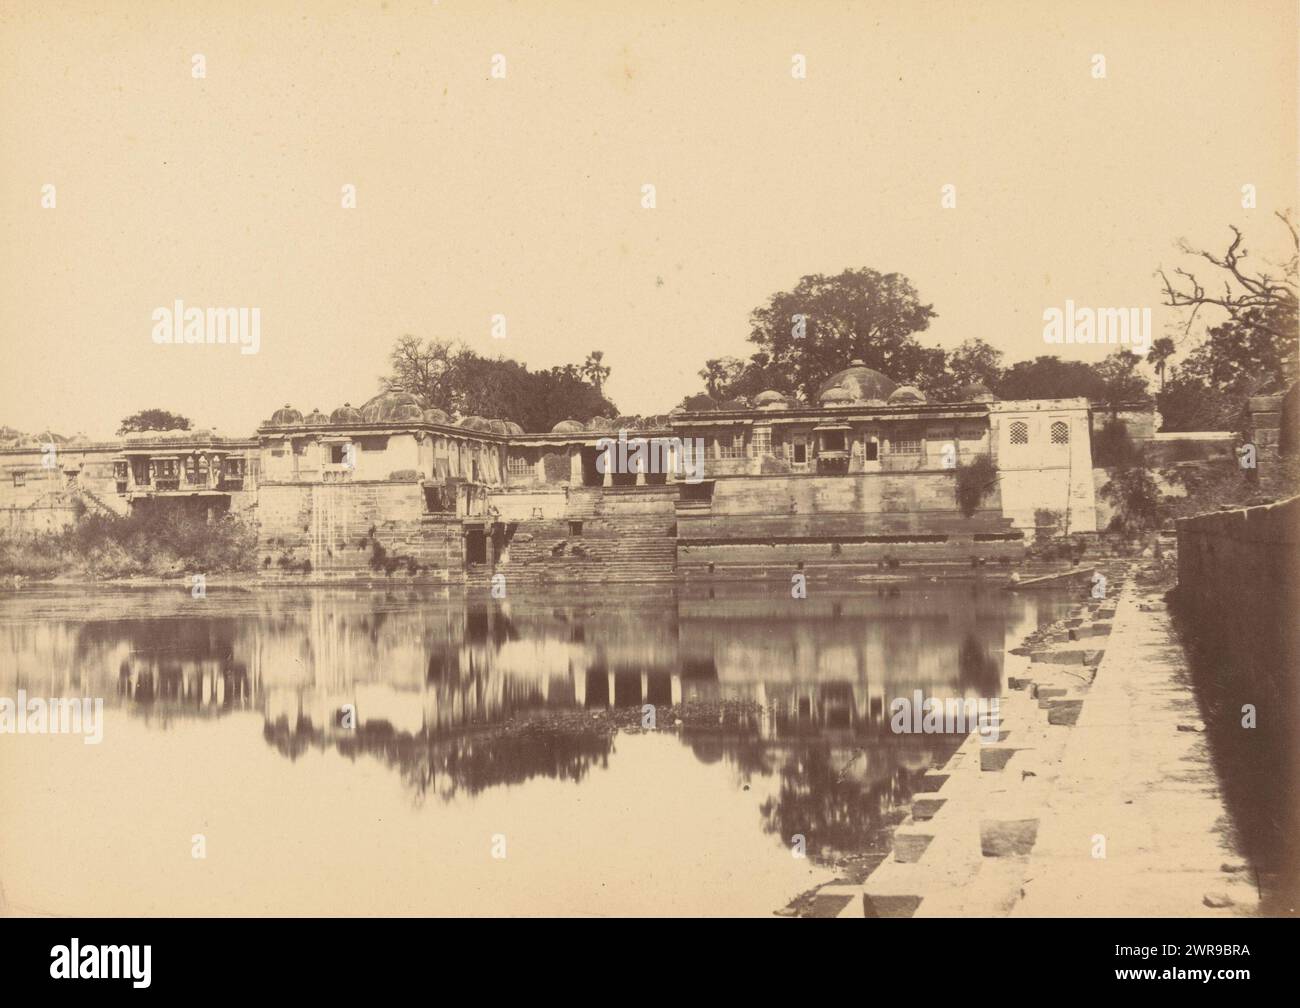 View of Sarkhej Roza near Ahmedabad, Sirkhej.- View from the South-east (title on object), Thomas Biggs, Sarkhej Roza, c. 1856 - in or before 1866, photographic support, albumen print, height 136 mm × width 188 mm, photograph Stock Photo